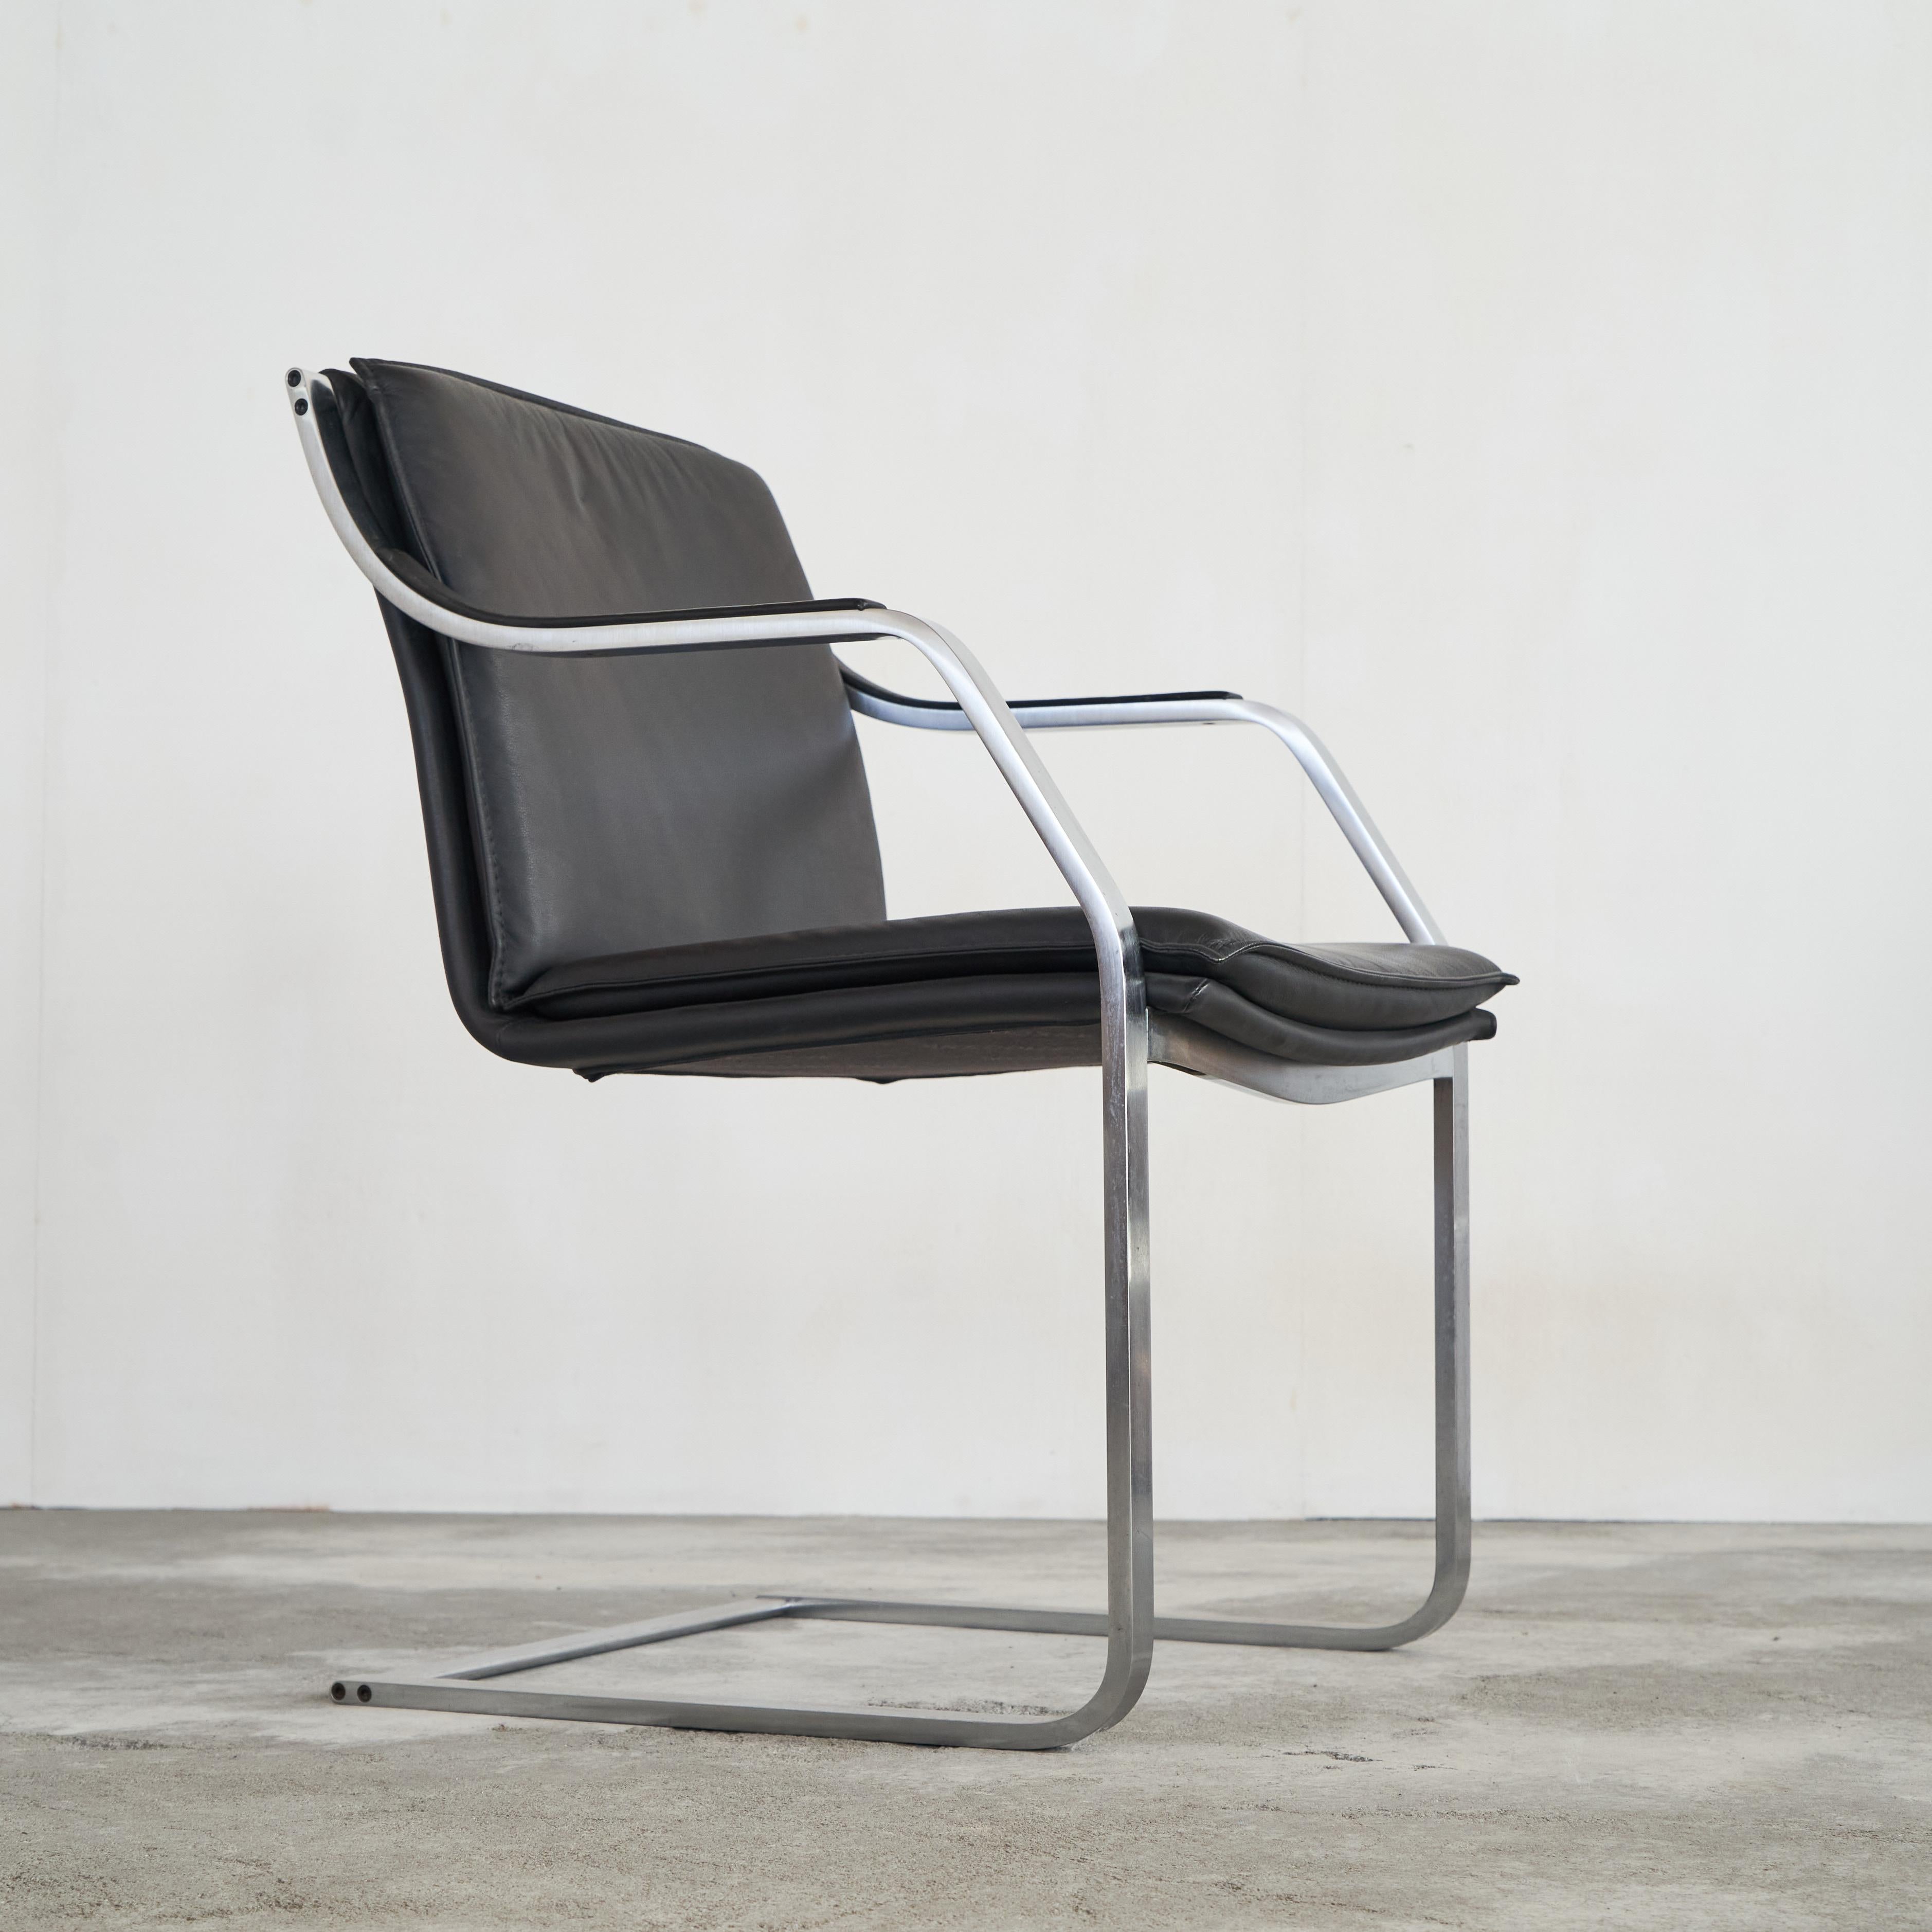 Rudolf Bernd Glatzel Armchair in Steel and Leather for Walter Knoll 1970s For Sale 4